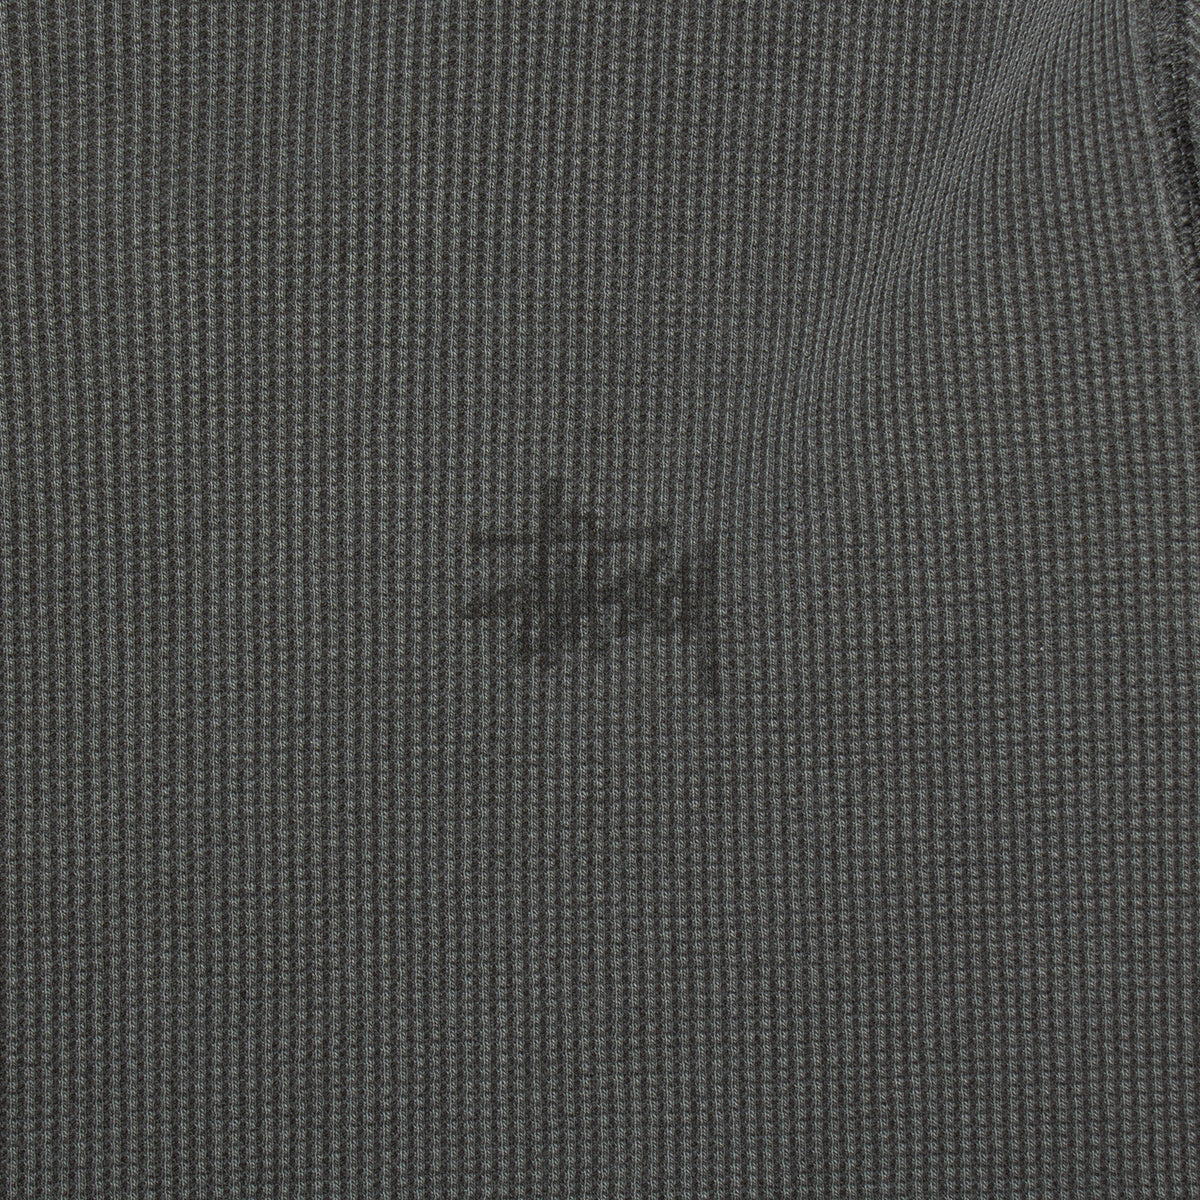 Stussy | Basic Stock L/S Thermal Style # 1140314 Color : Washed Black